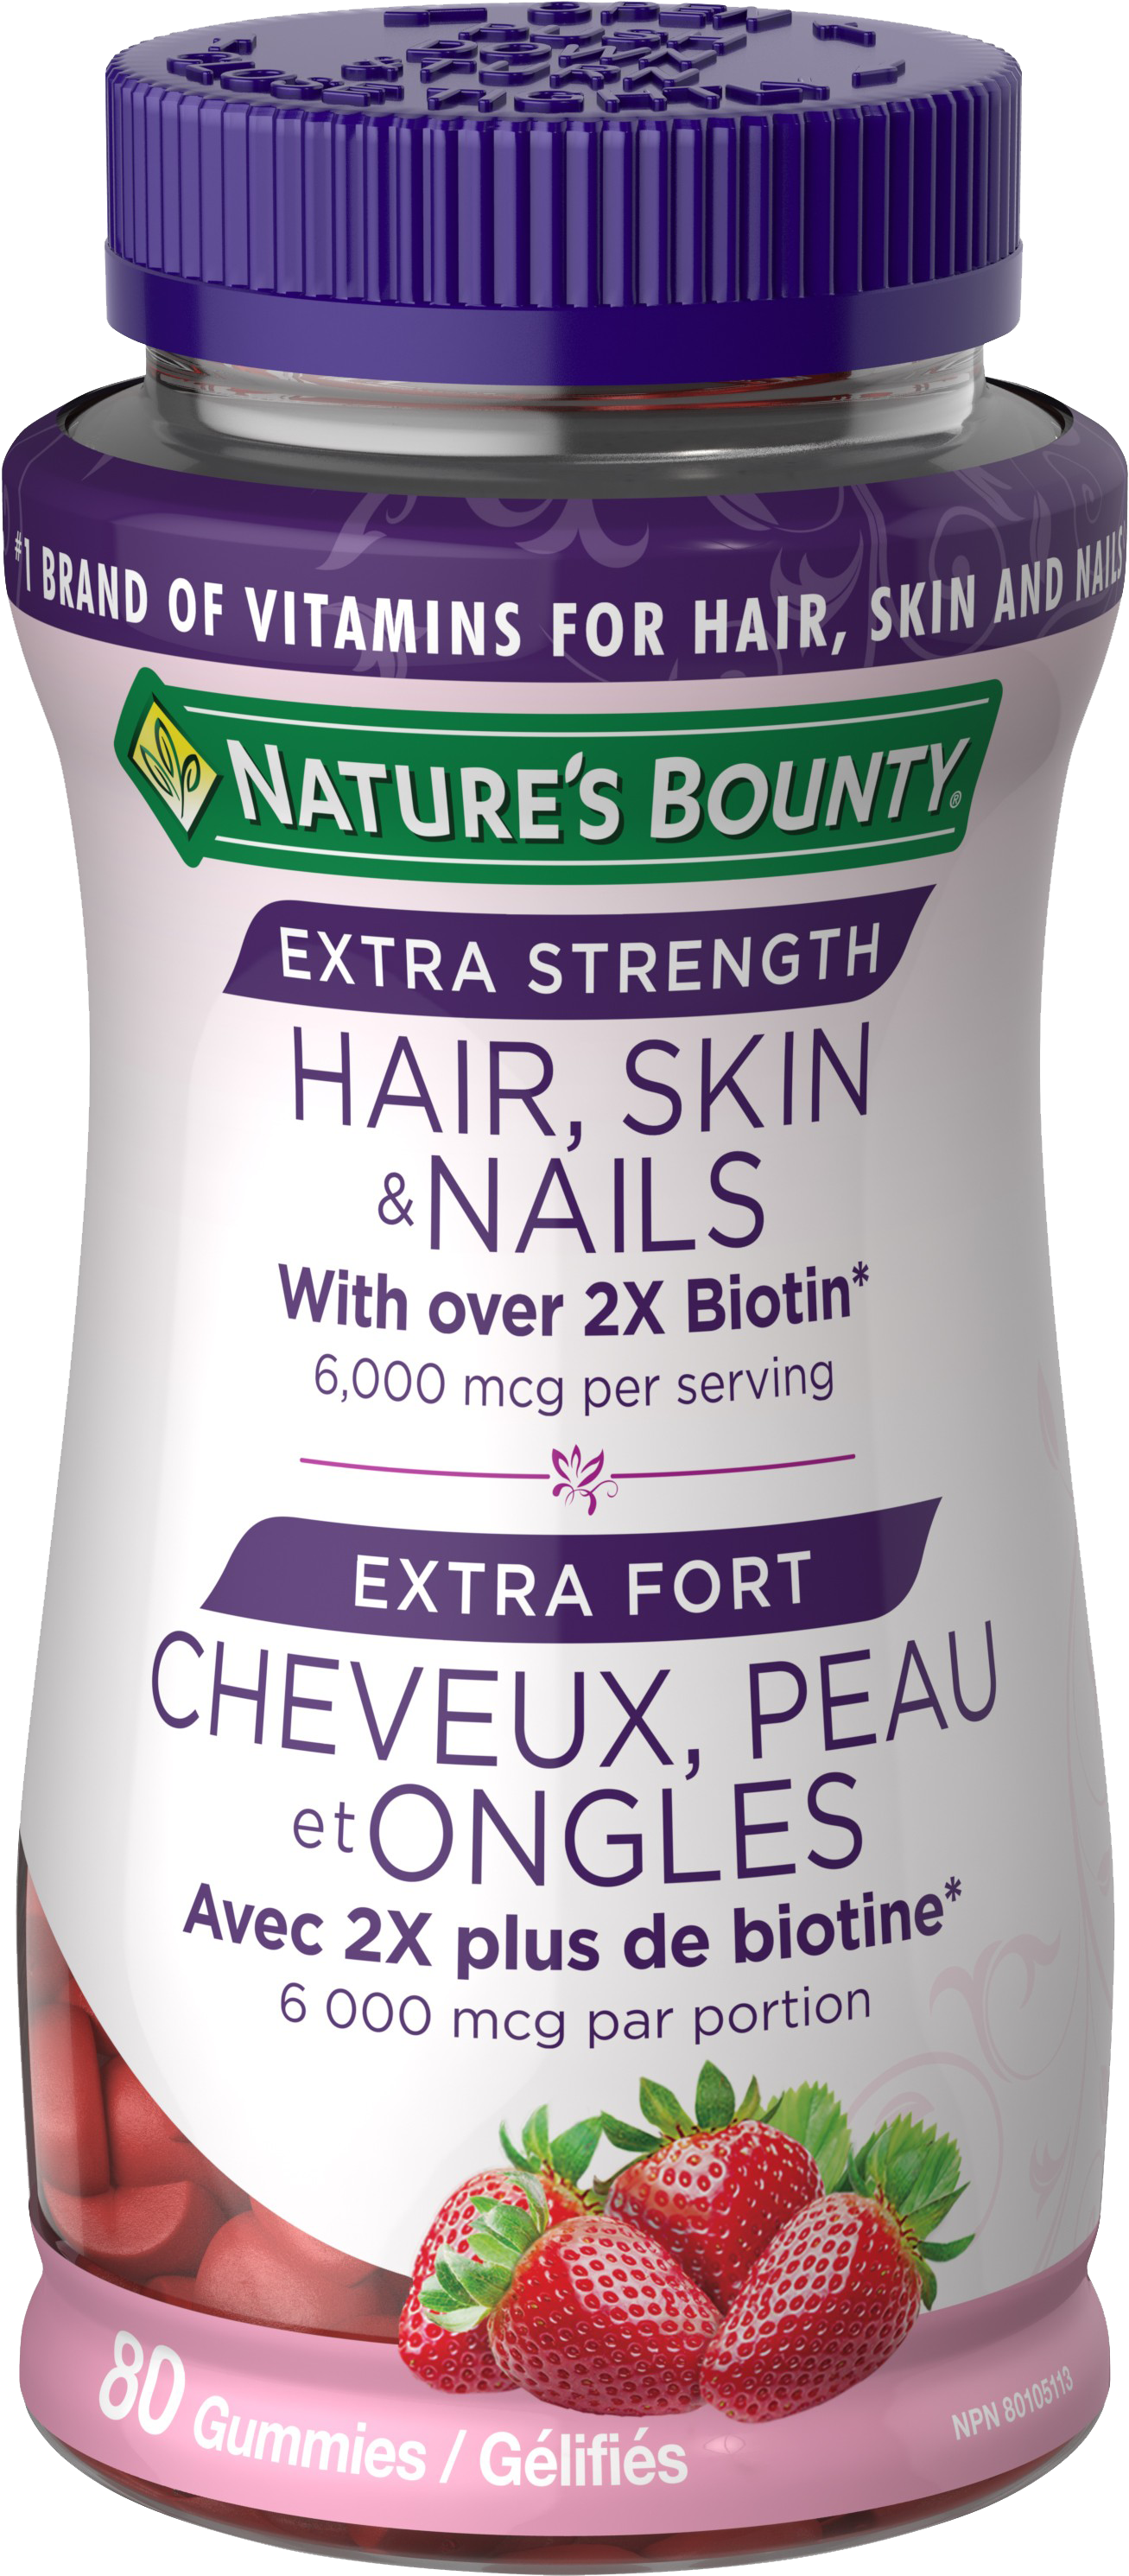 Extra Fort Cheveux, Peau et Ongles | Made with nestle